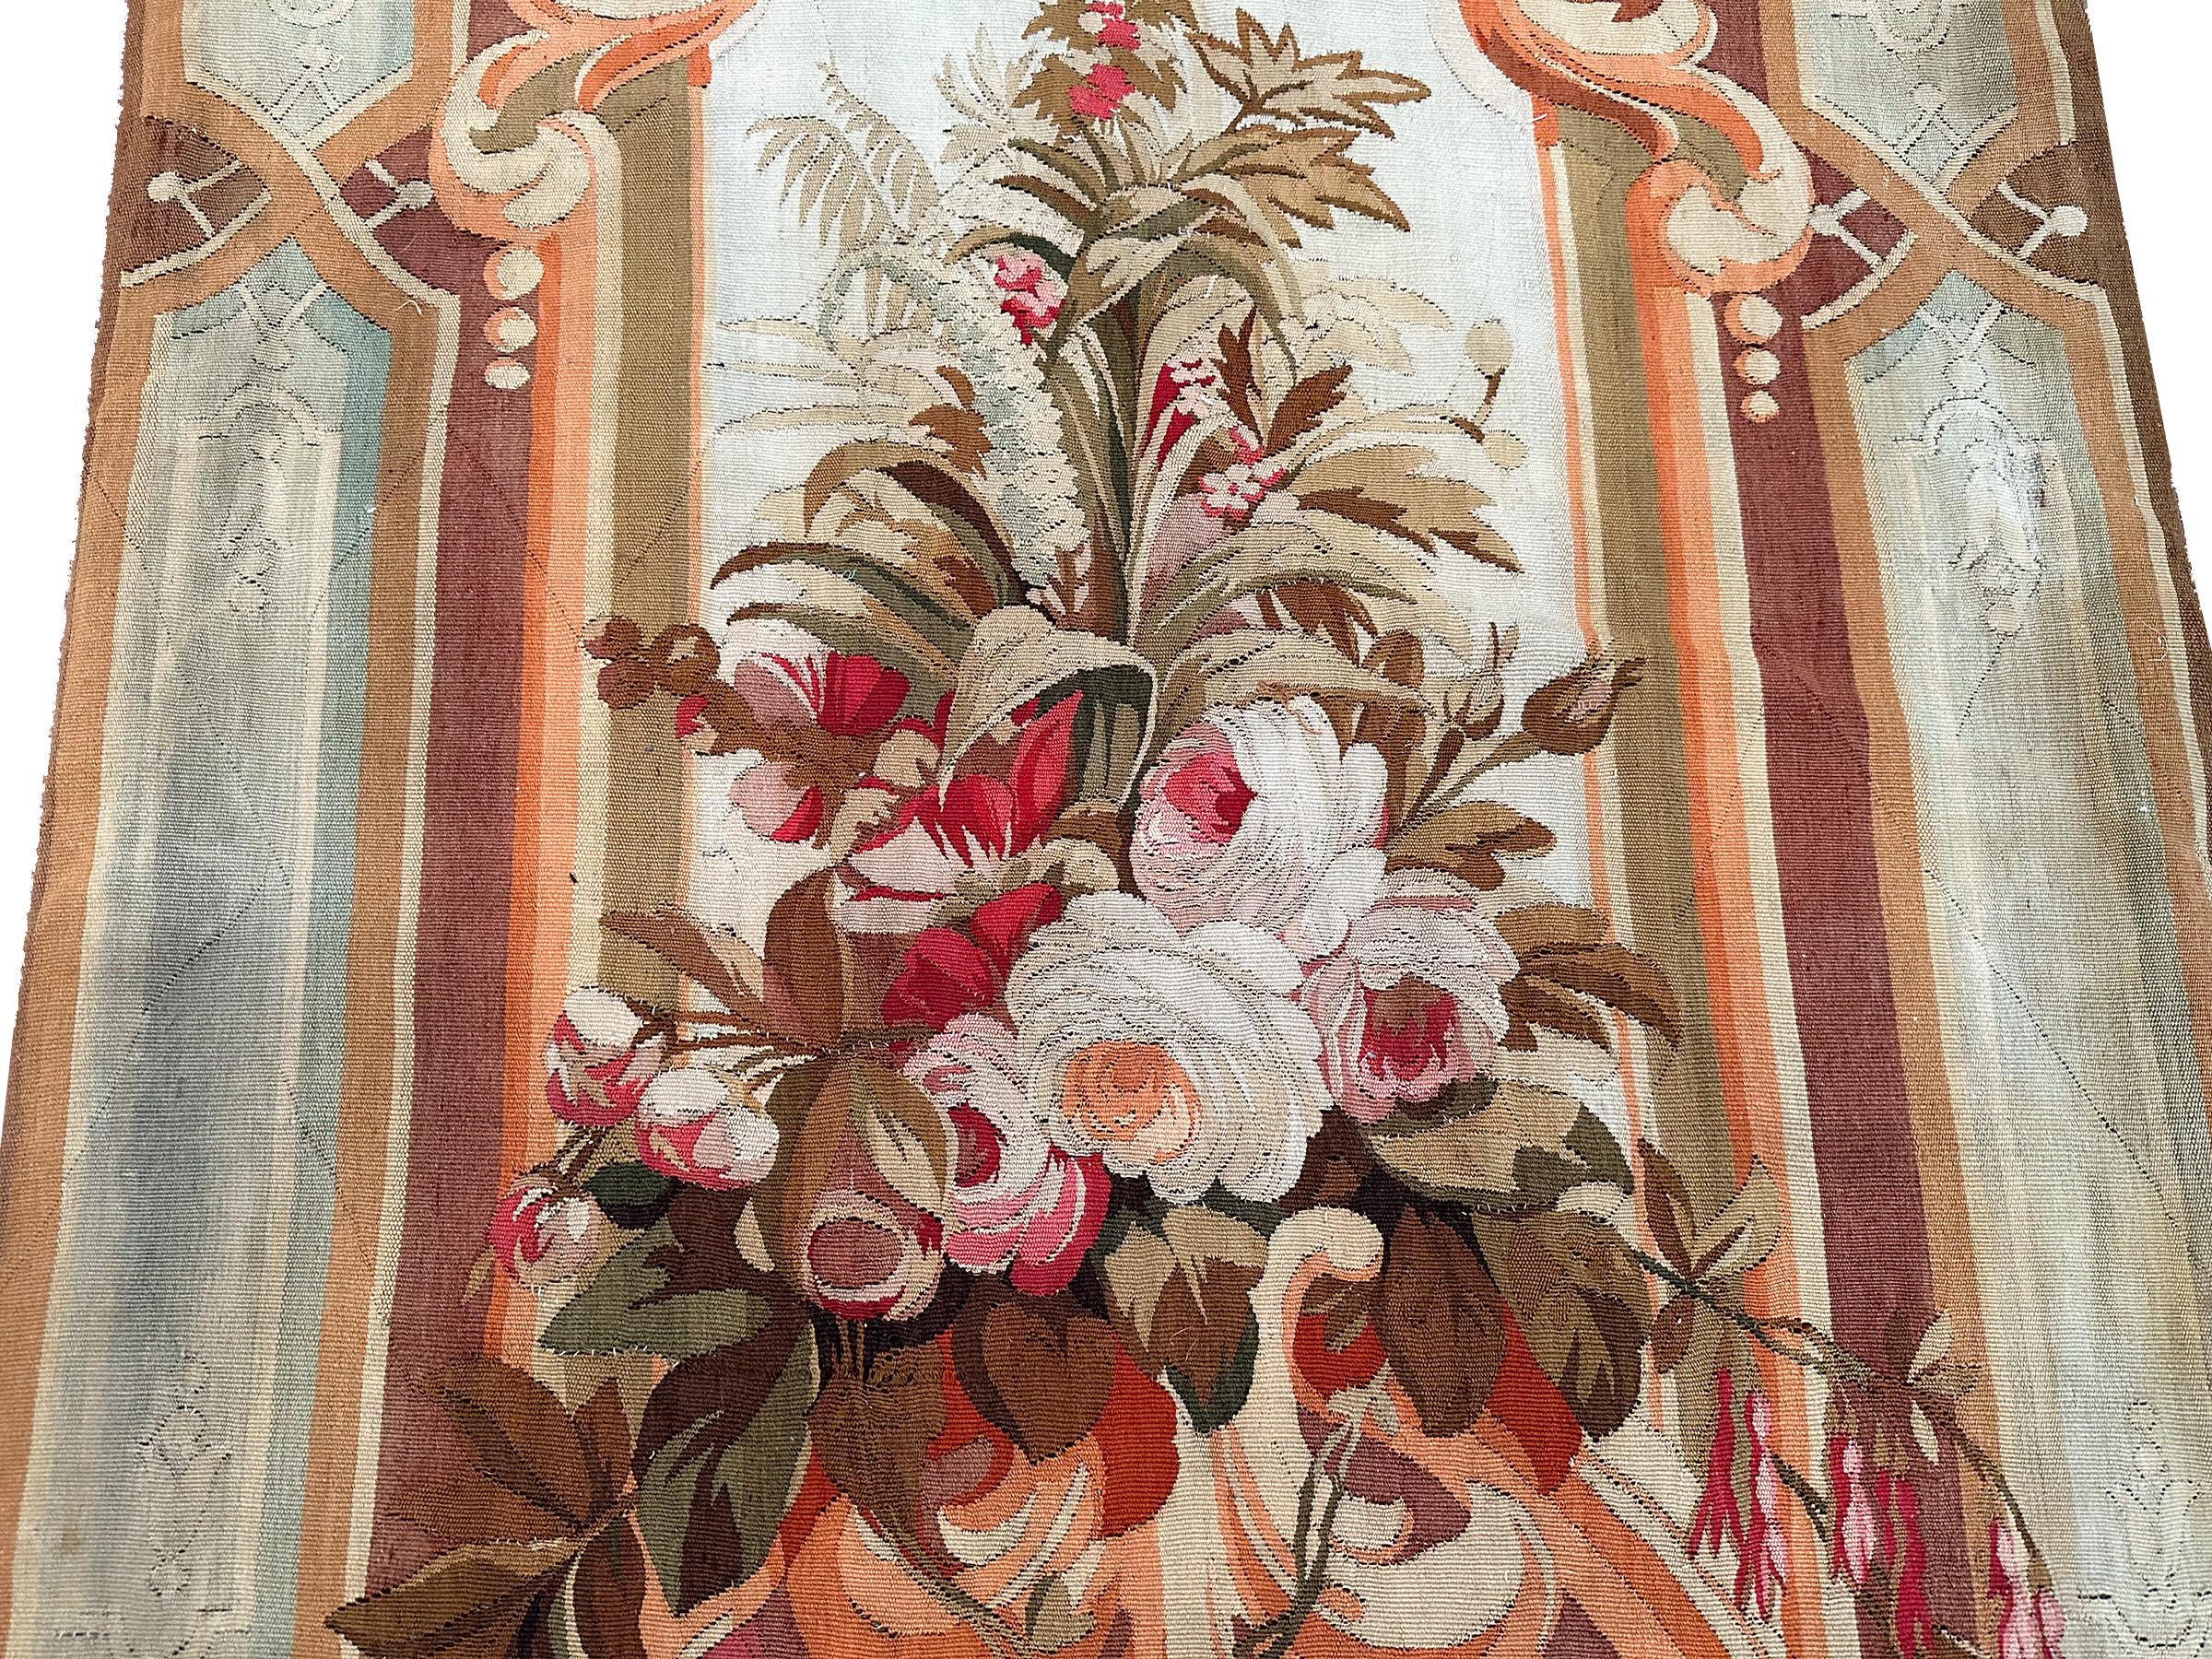 Baroque 1920 Antique French Aubusson Tapestry Rug Floral Vase Runner 3x10 1880 97x287cm For Sale